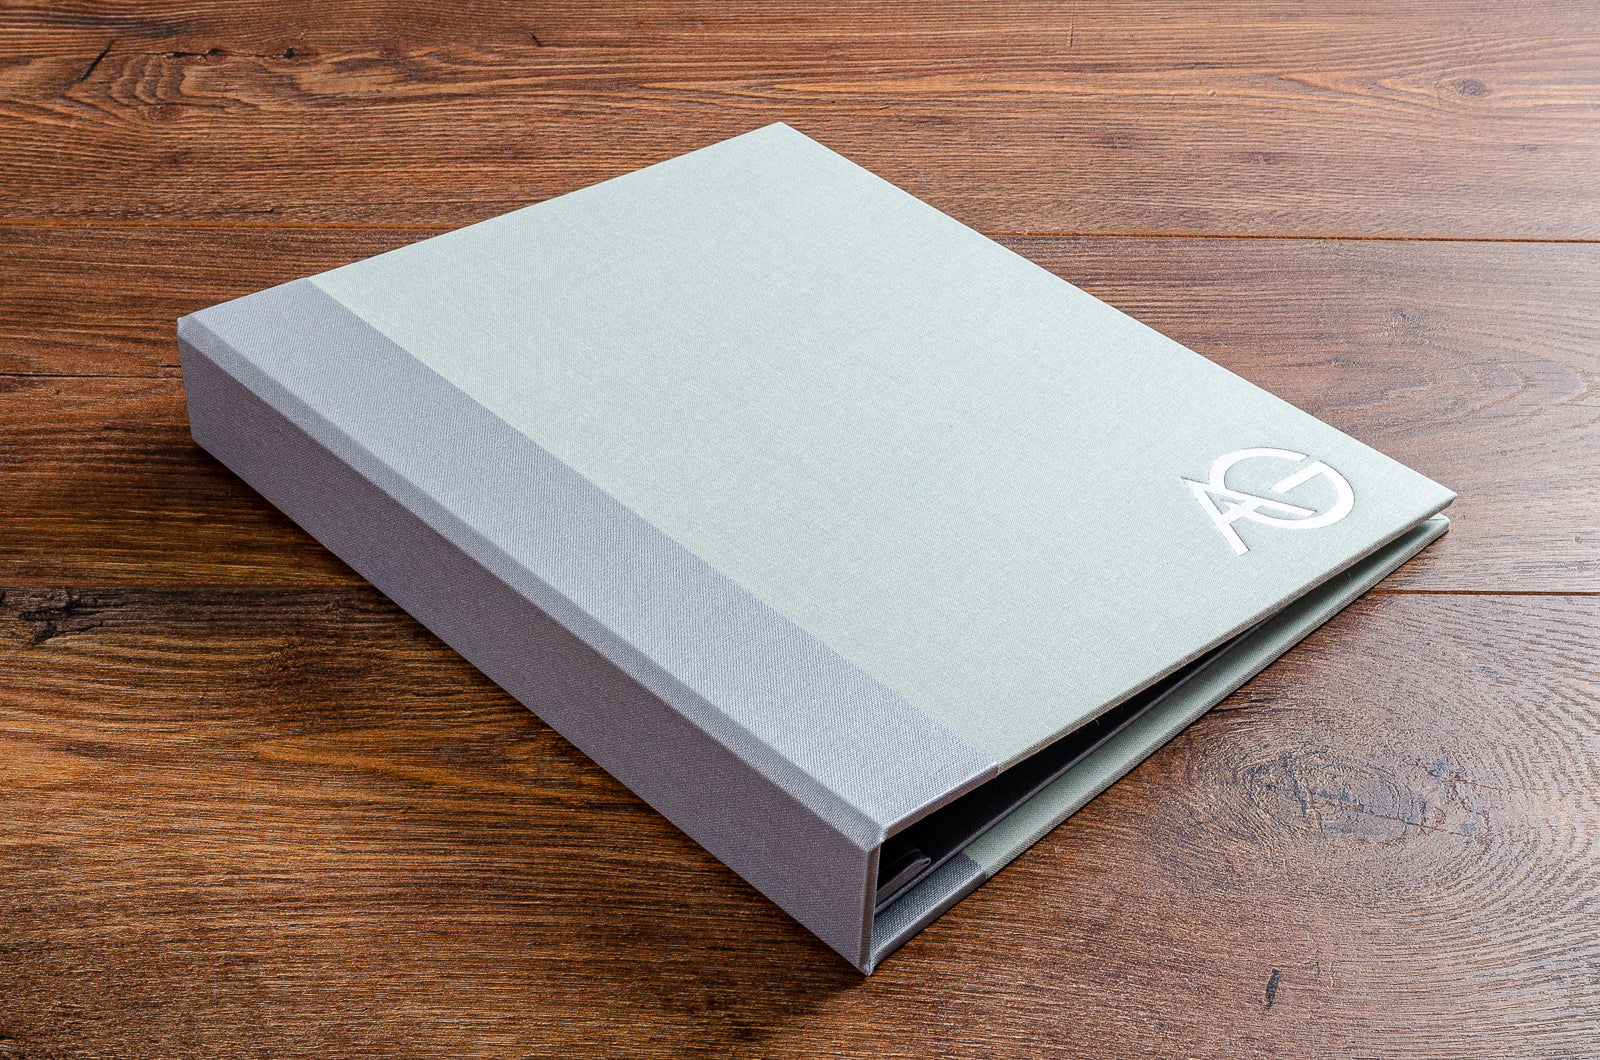 11x14 screw post portfolio book with platinum silver spine cover and Lichen green cover with silver foil stamping